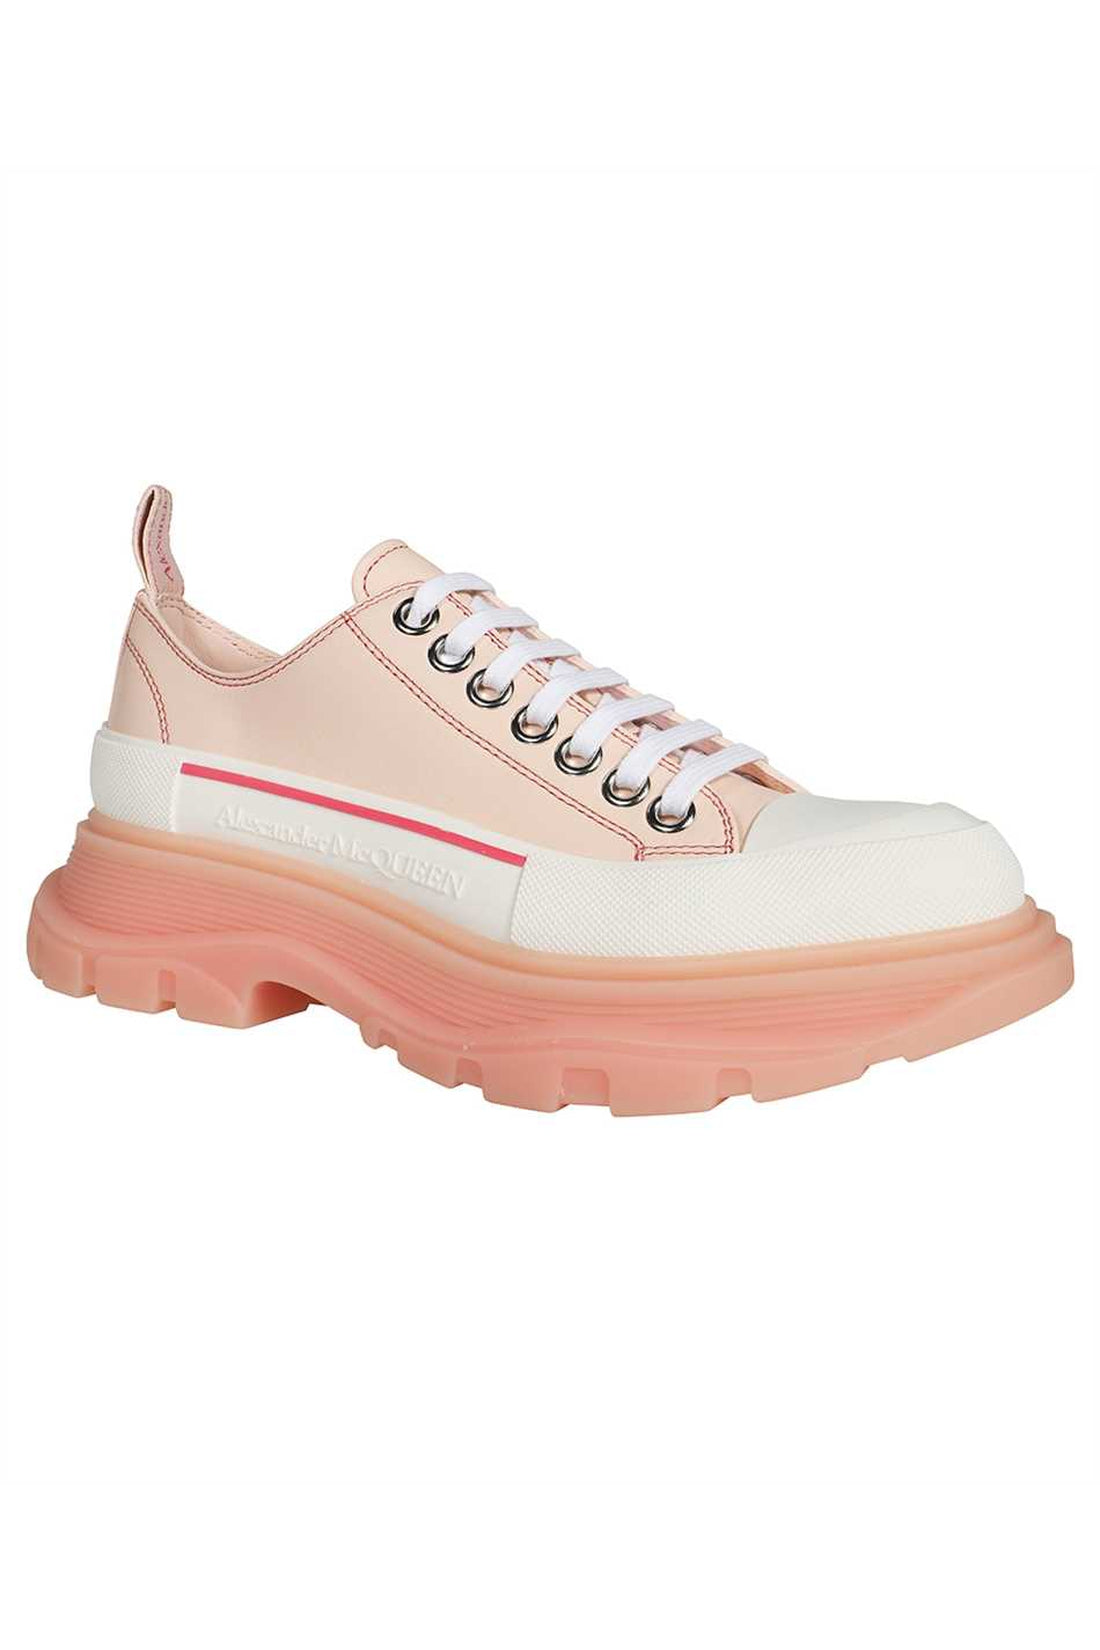 Alexander McQueen-OUTLET-SALE-Tread Slick chunky sneakers-ARCHIVIST